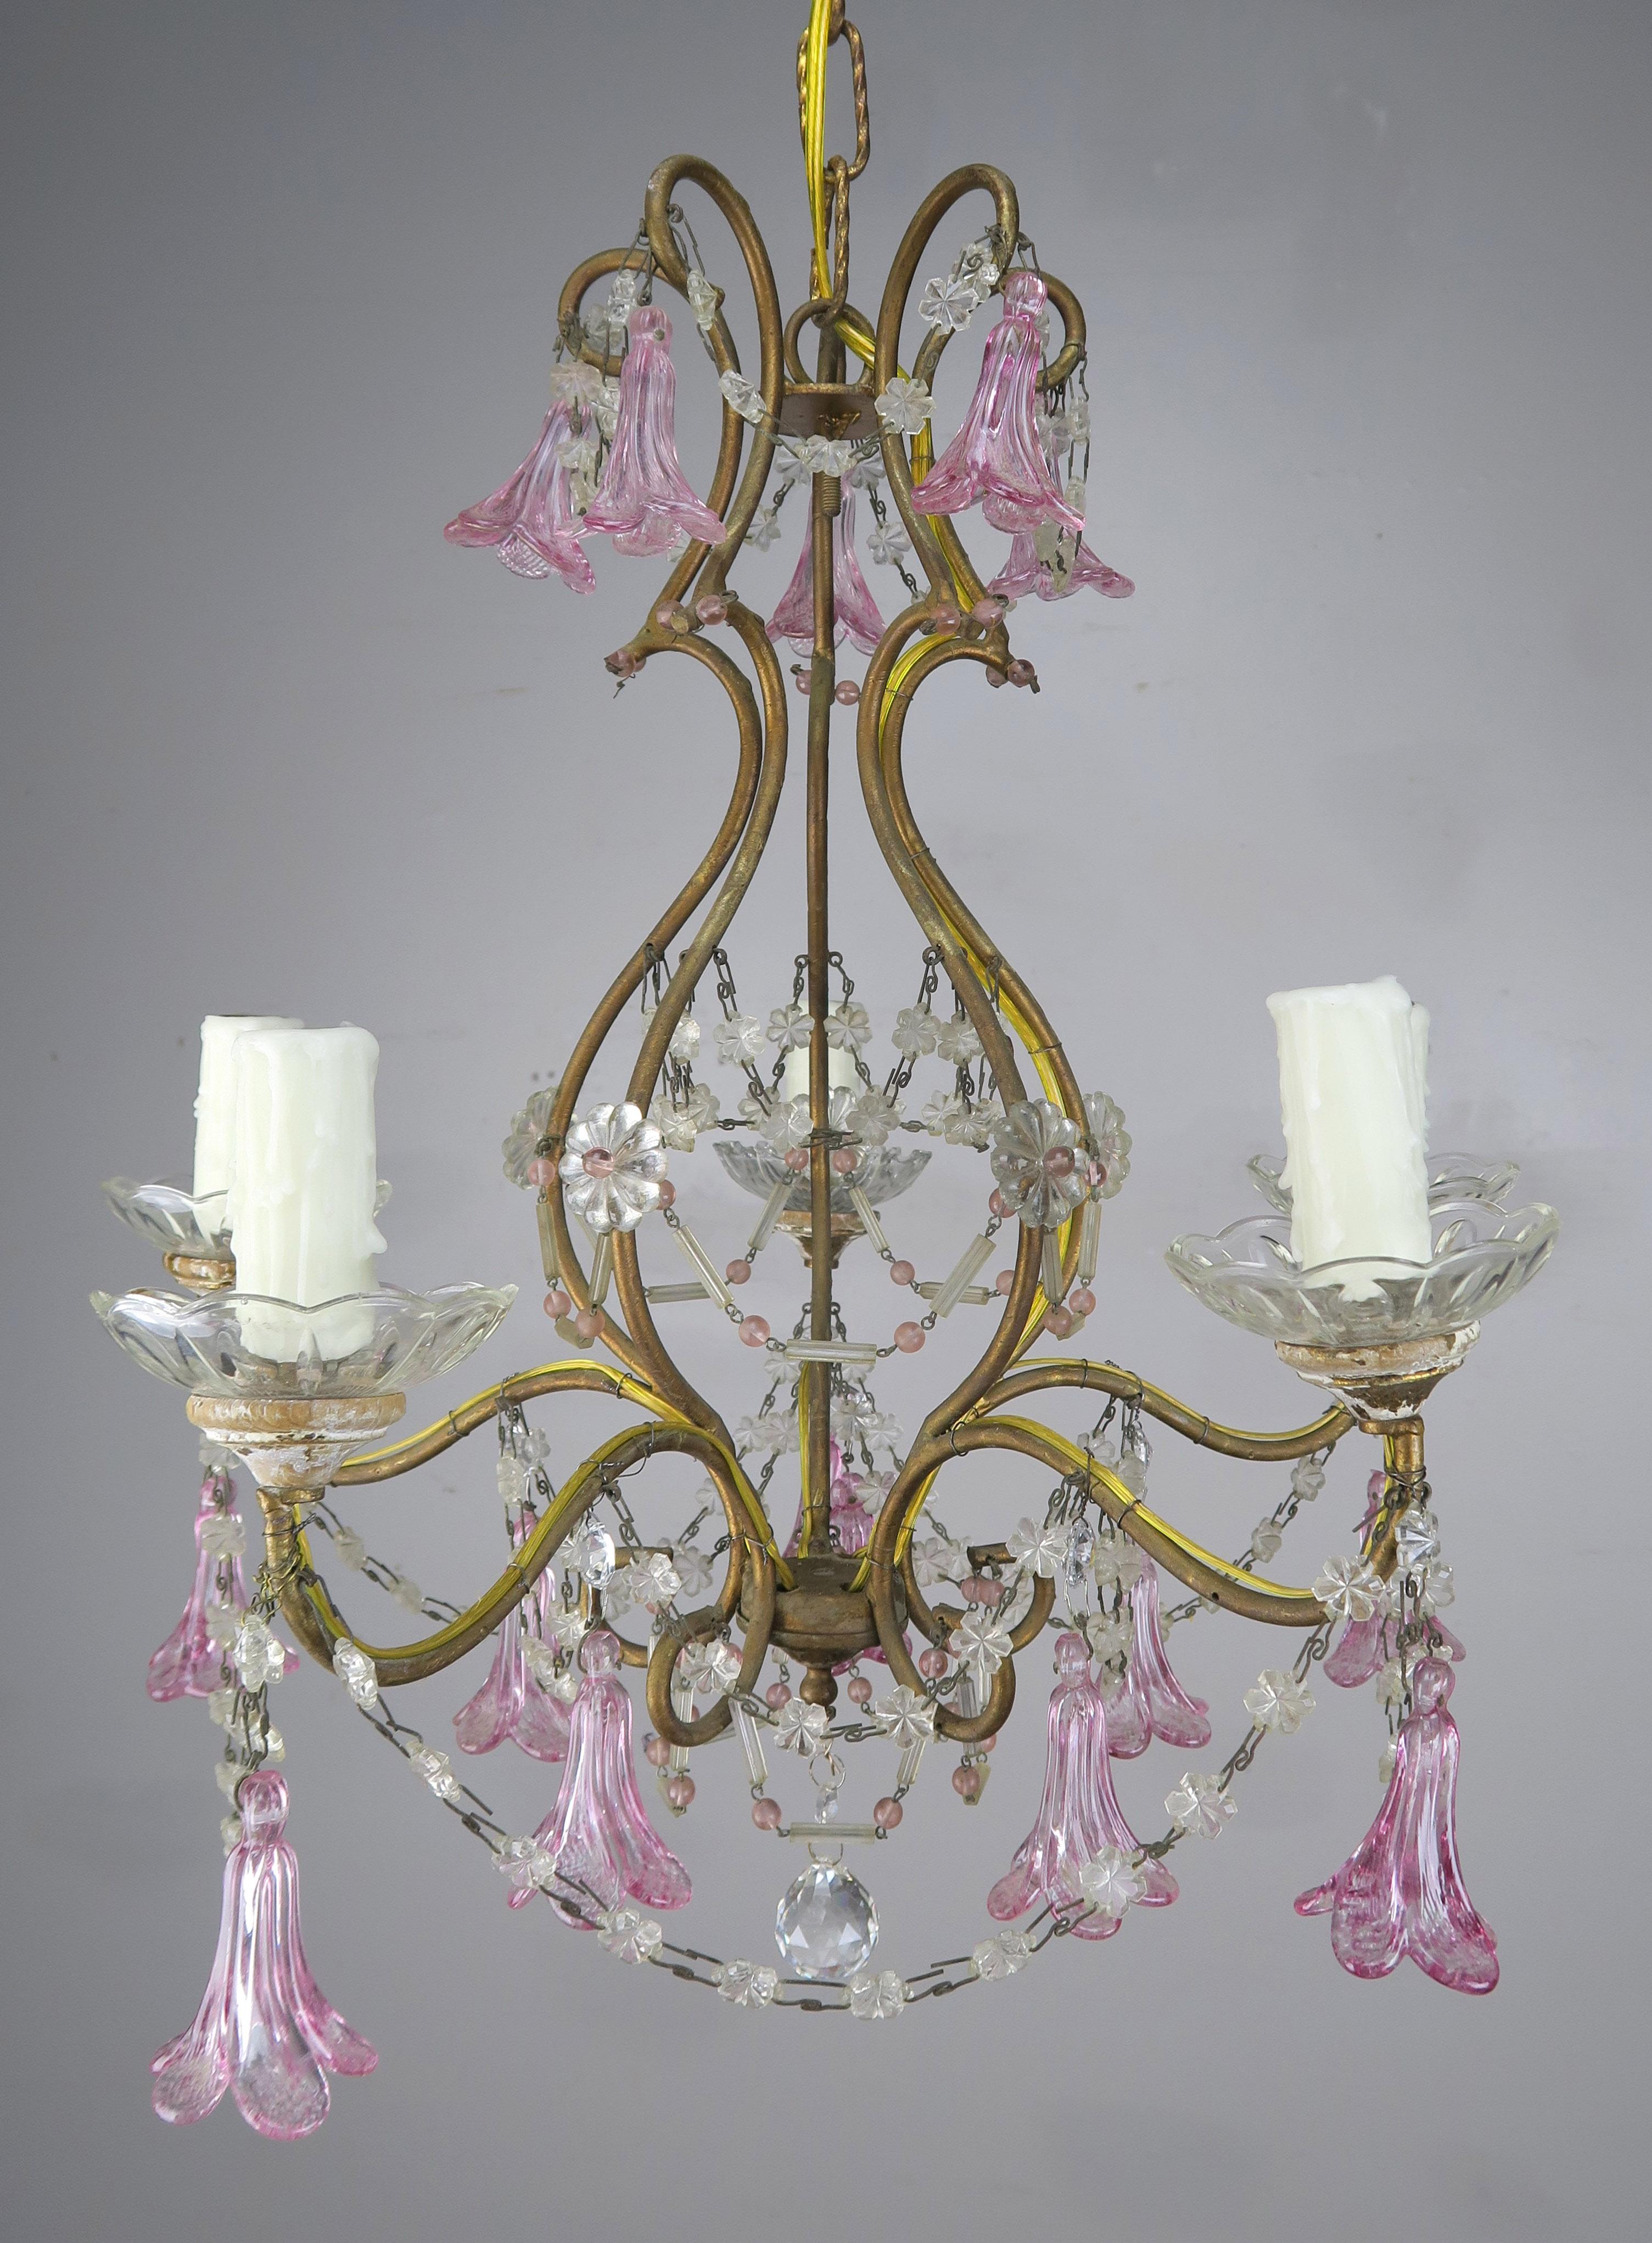 Four light Italian crystal brass chandelier with hand blown pink flower glass drops throughout combined with garlands consisting of pink and clear beads. The fixture is newly rewired with drip wax candle covers. Includes chain and canopy.